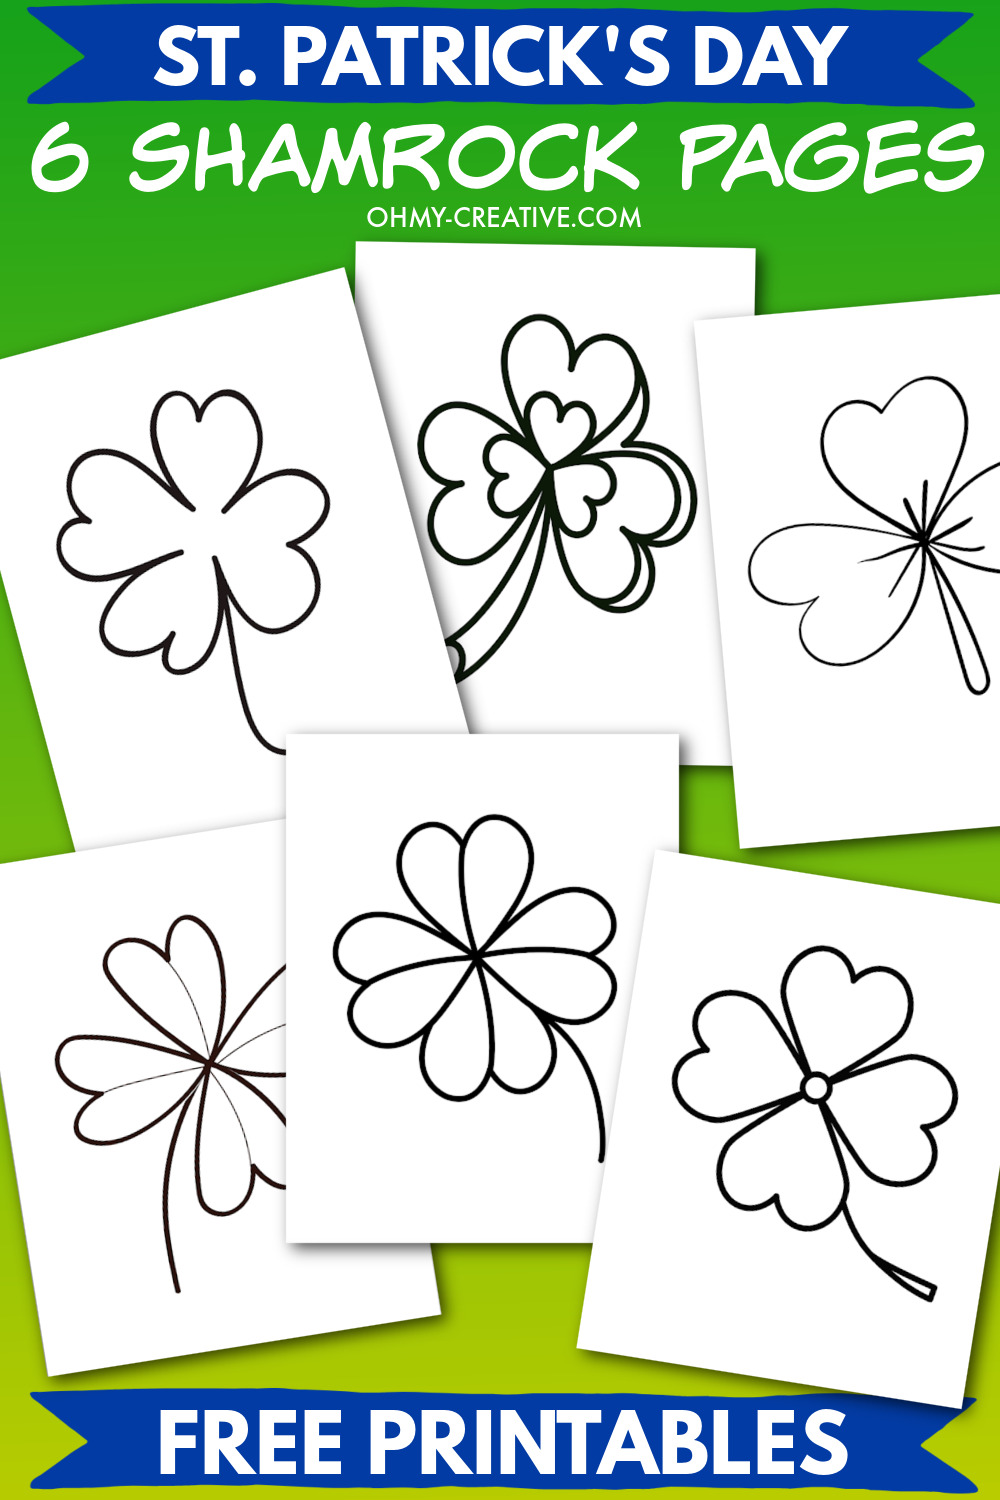 A collage of 6 free printable shamrock templates. Each template is a different style of black line art shamrock.